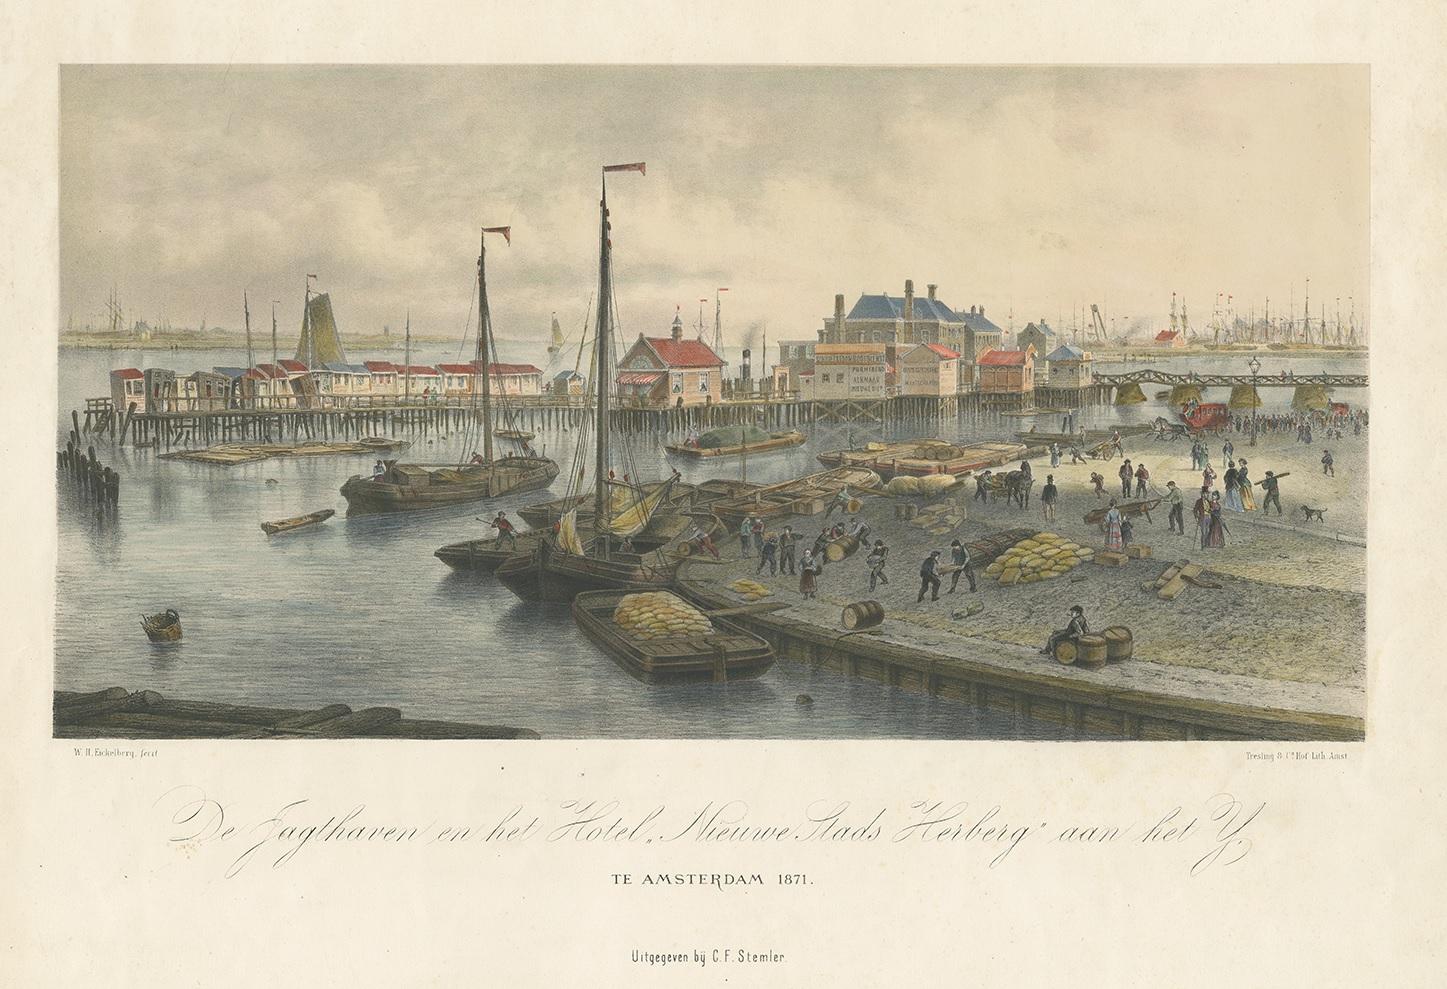 Antique print titled 'De Jagthaven en het Hotel Nieuwe Stads Herberg aan het IJ'. Large lithograph made by Tresling & Co after W.H. Eickelberg. This print depicts the IJ, Amsterdam's waterfront. Depicted are several boats and figures on the dock.